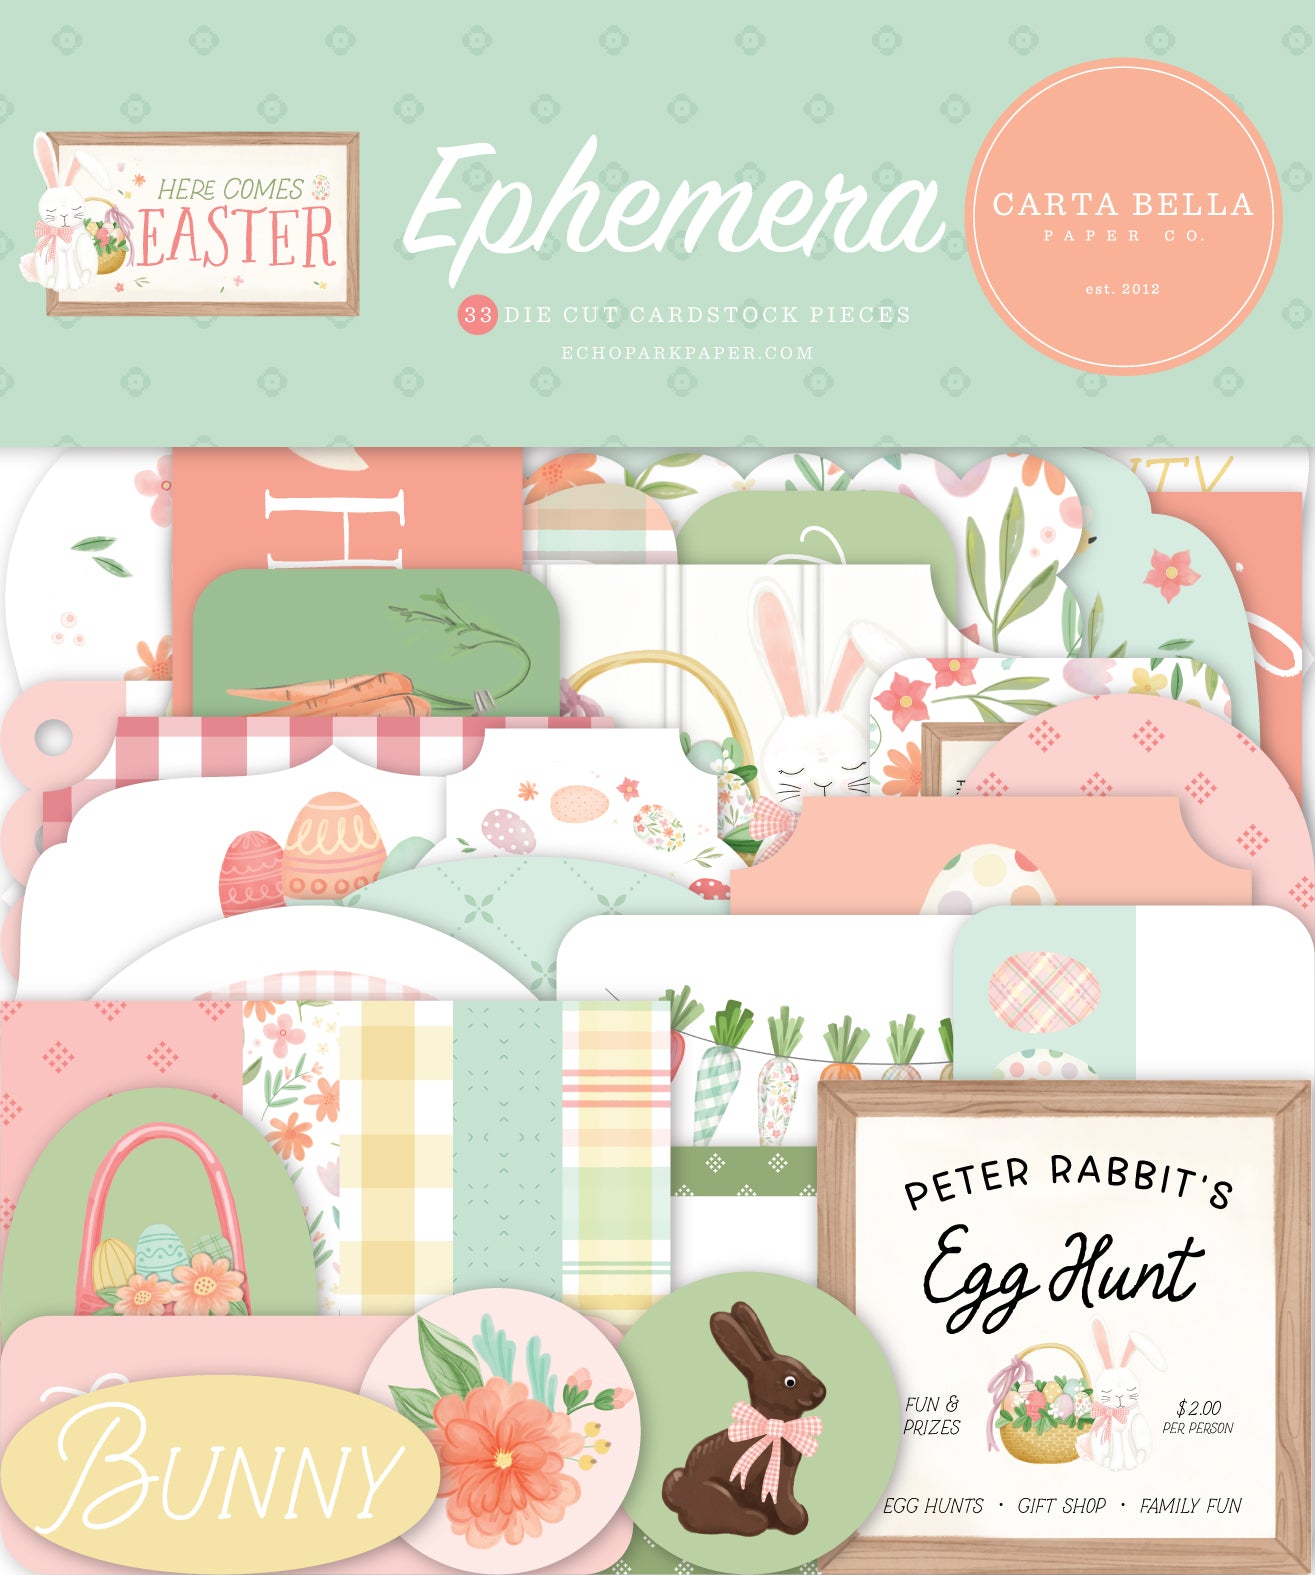 Here Comes Easter Collection 5 x 5 Scrapbook Ephemera by Carta Bella